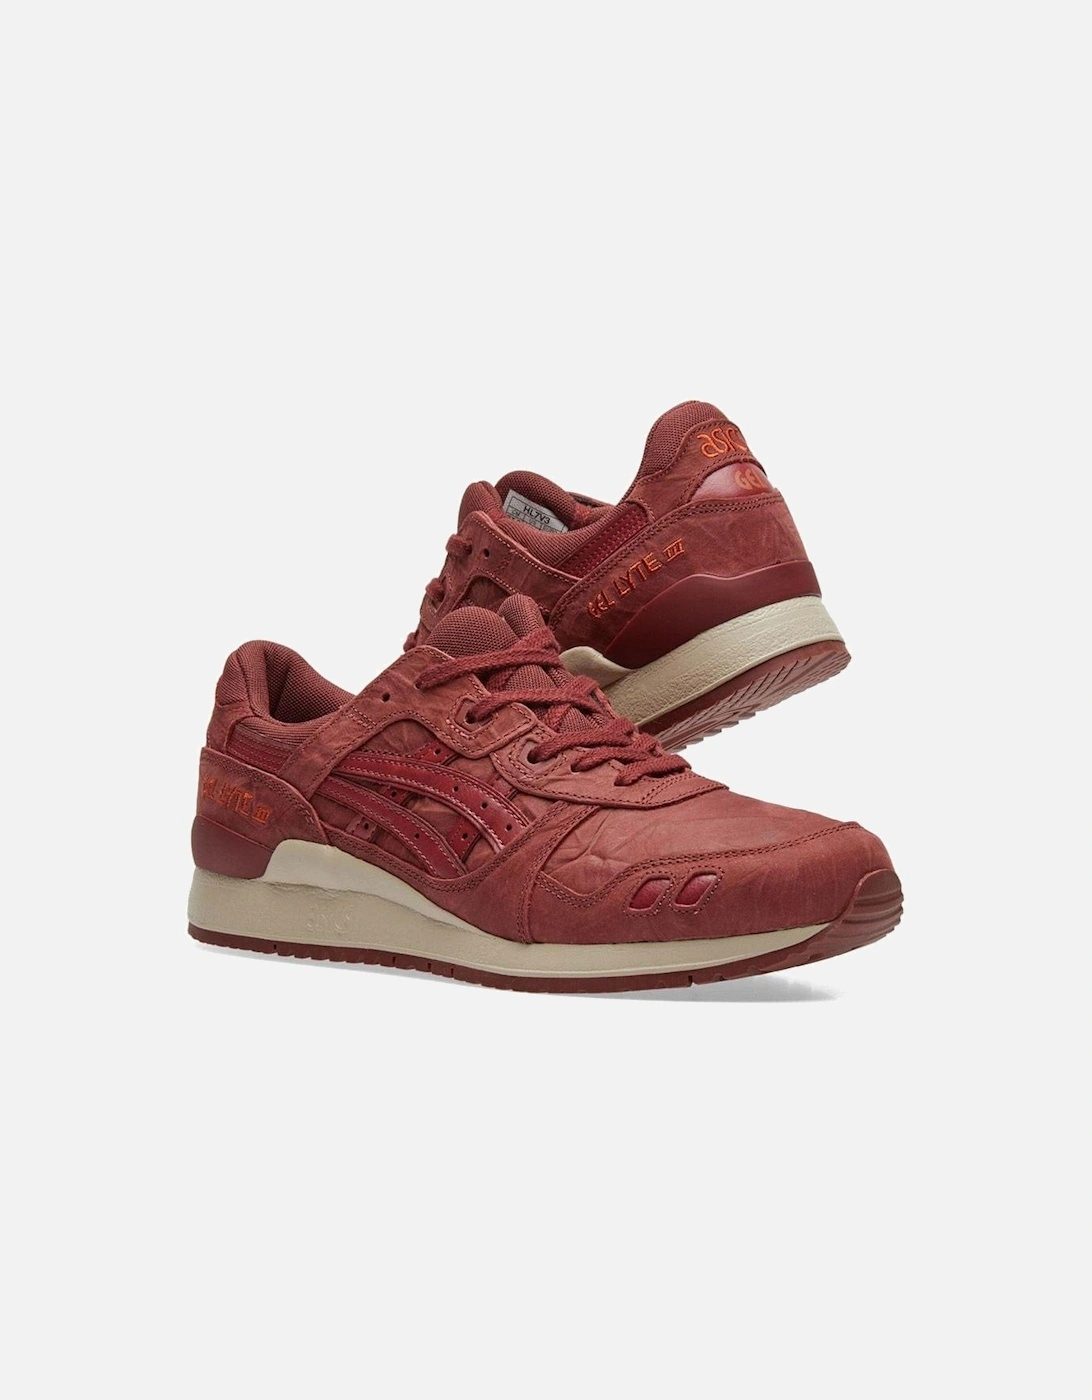 Gell Lyte III Trainers - Russet Brown  HL7V3-2626